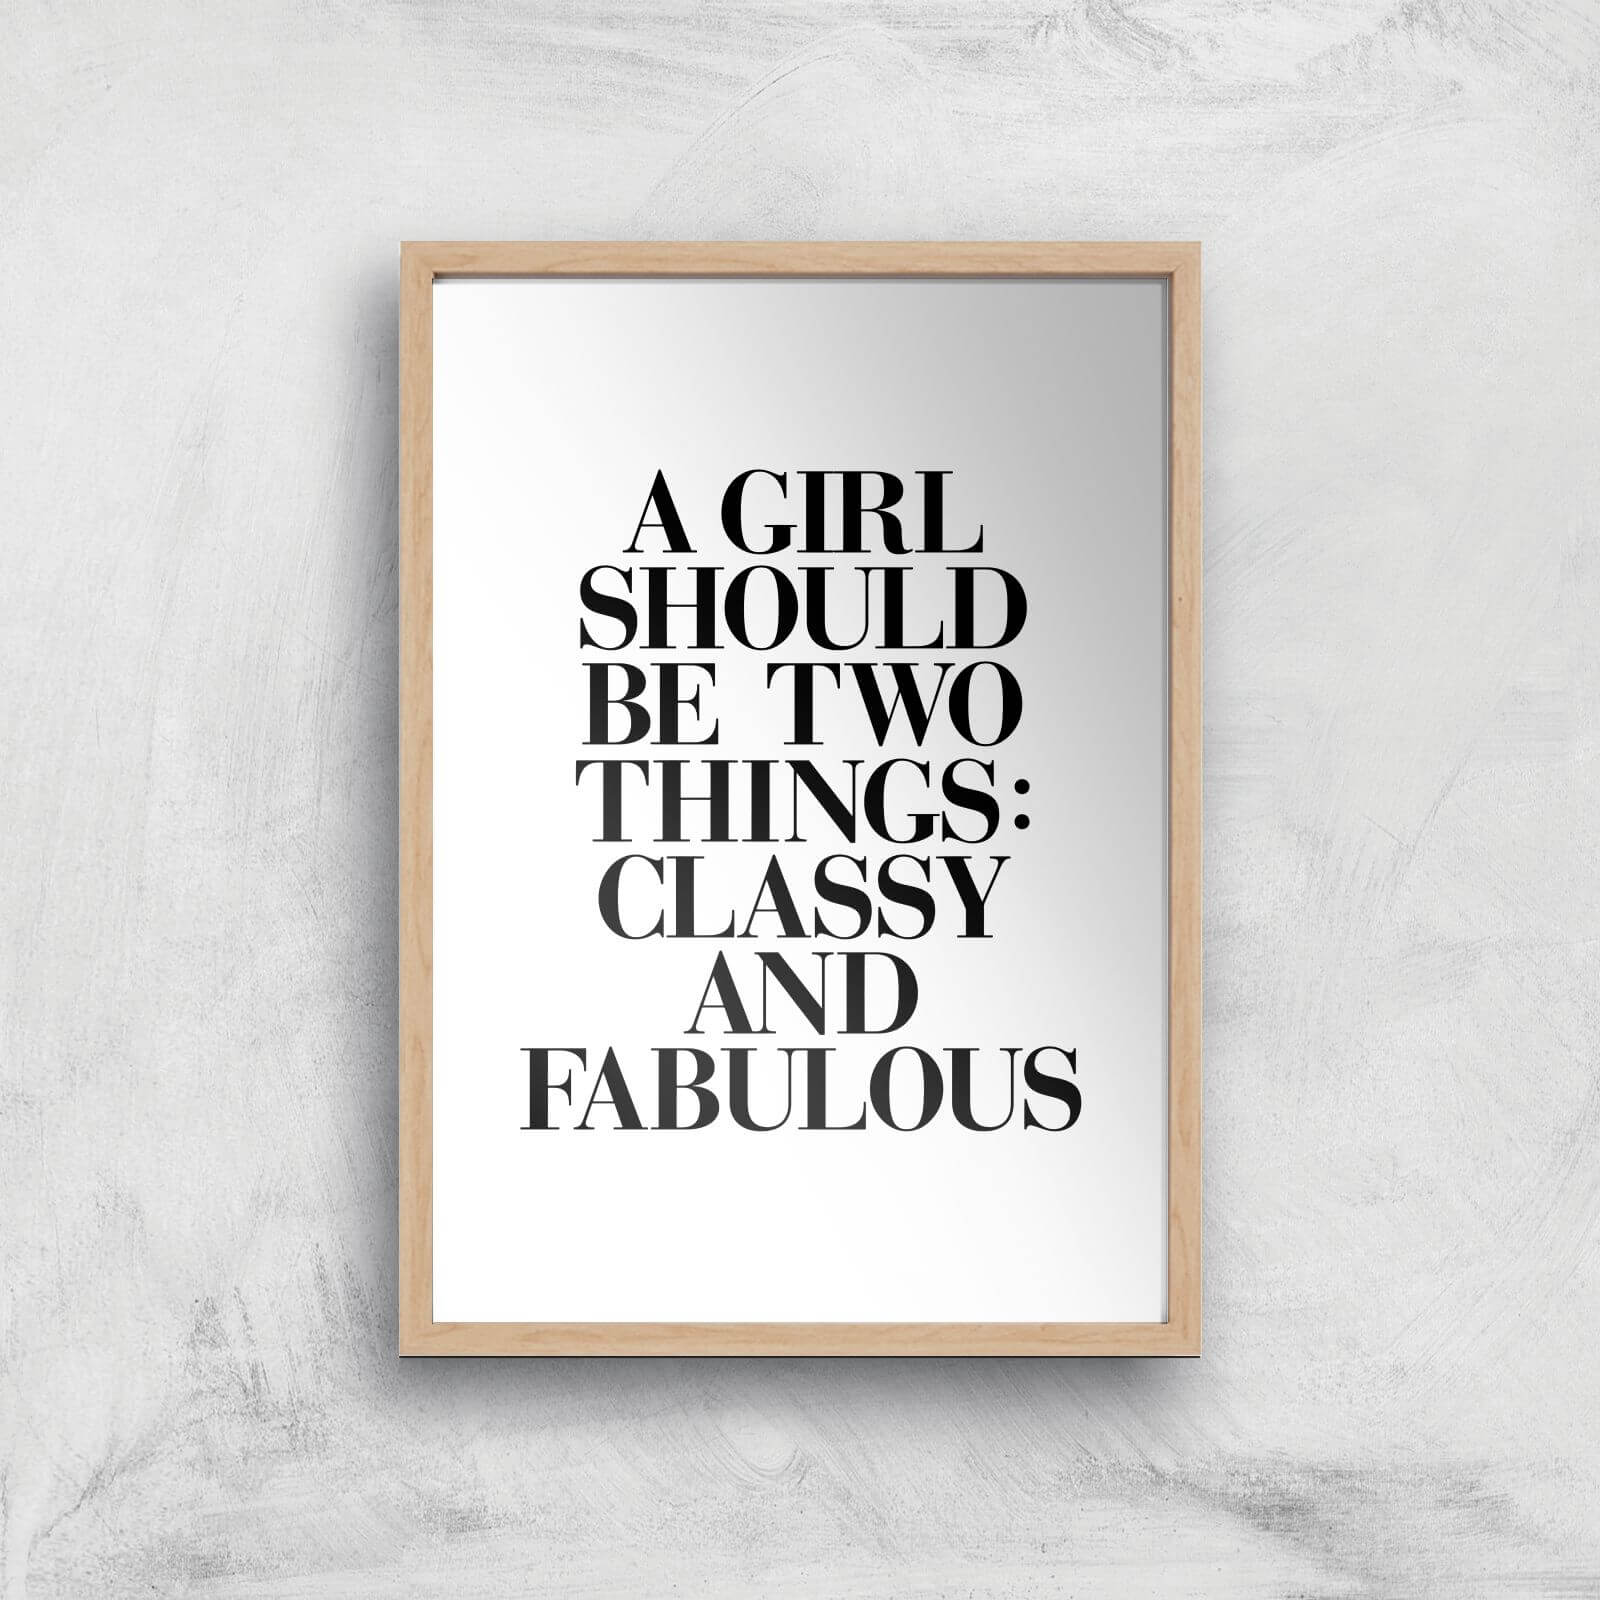 The Motivated Type A Girl Should Be Two Things: Classy And Fabulous Giclee Art Print - A3 - Wooden Frame